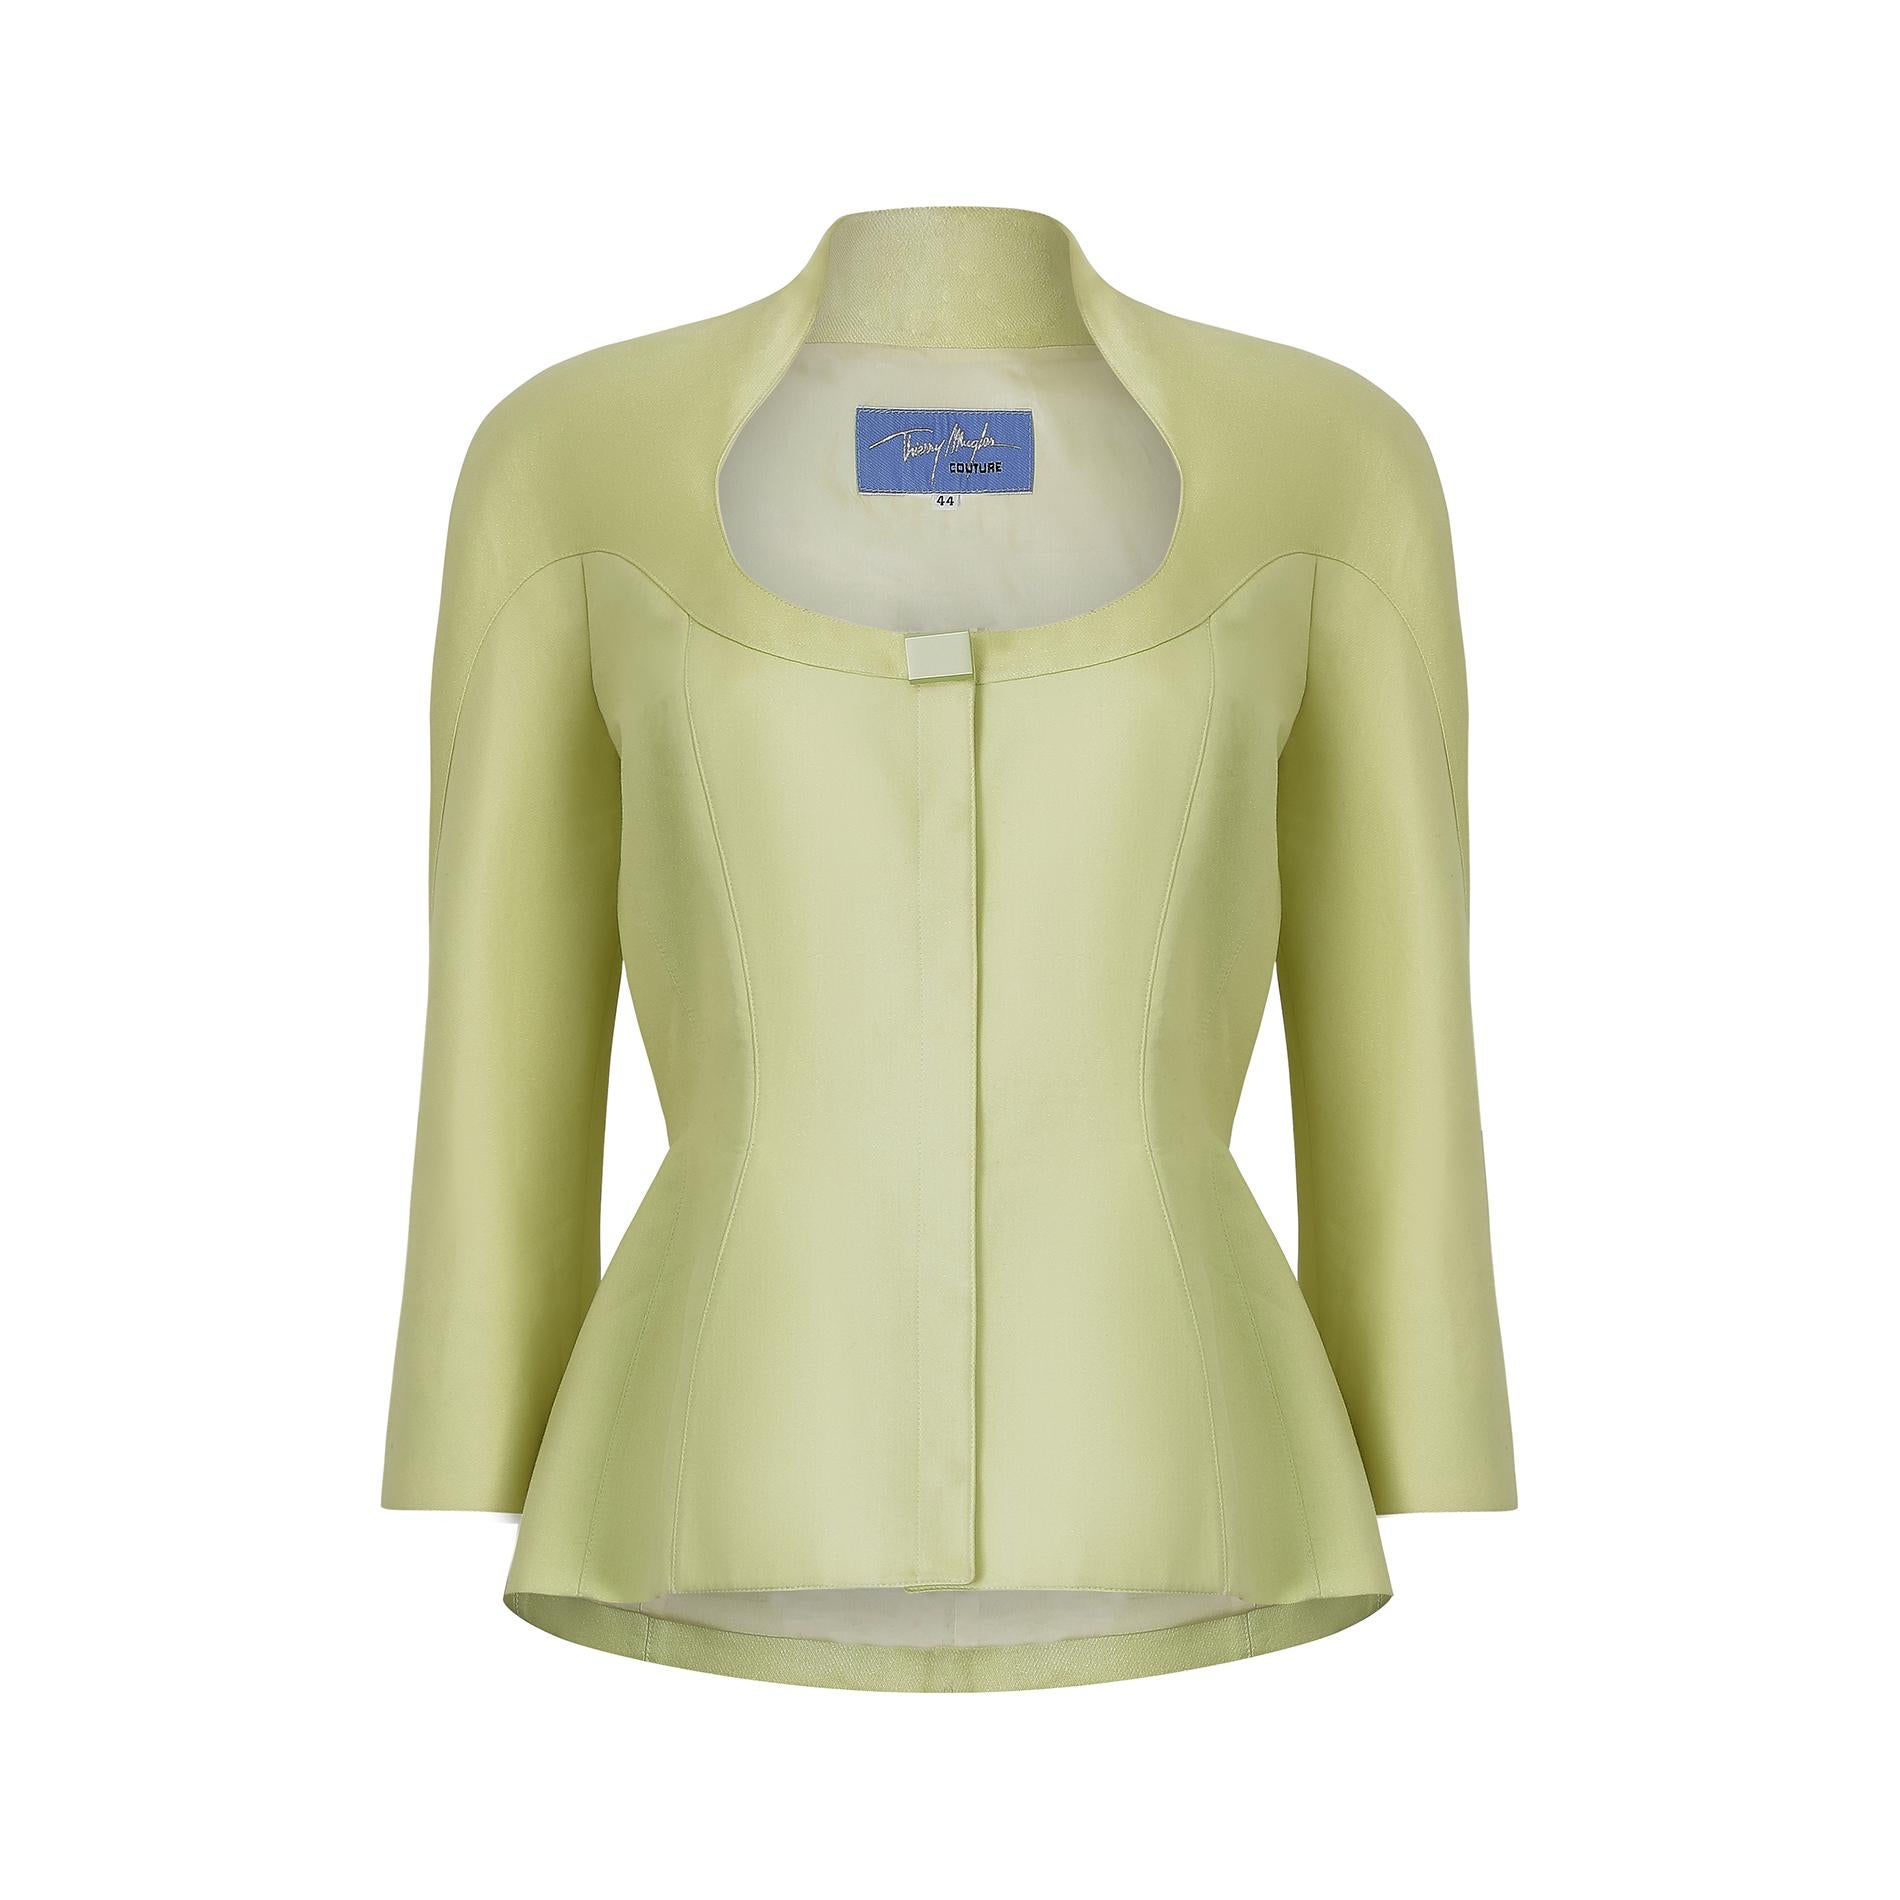 This 1990s Thierry Mugler couture jacket is cut from an unusual medium weight woven fabric.  It is a pale shade of chartreuse, almost lime green, with flecks of sparkle to create an iridescent effect.  Featuring a rounded front and high collar to